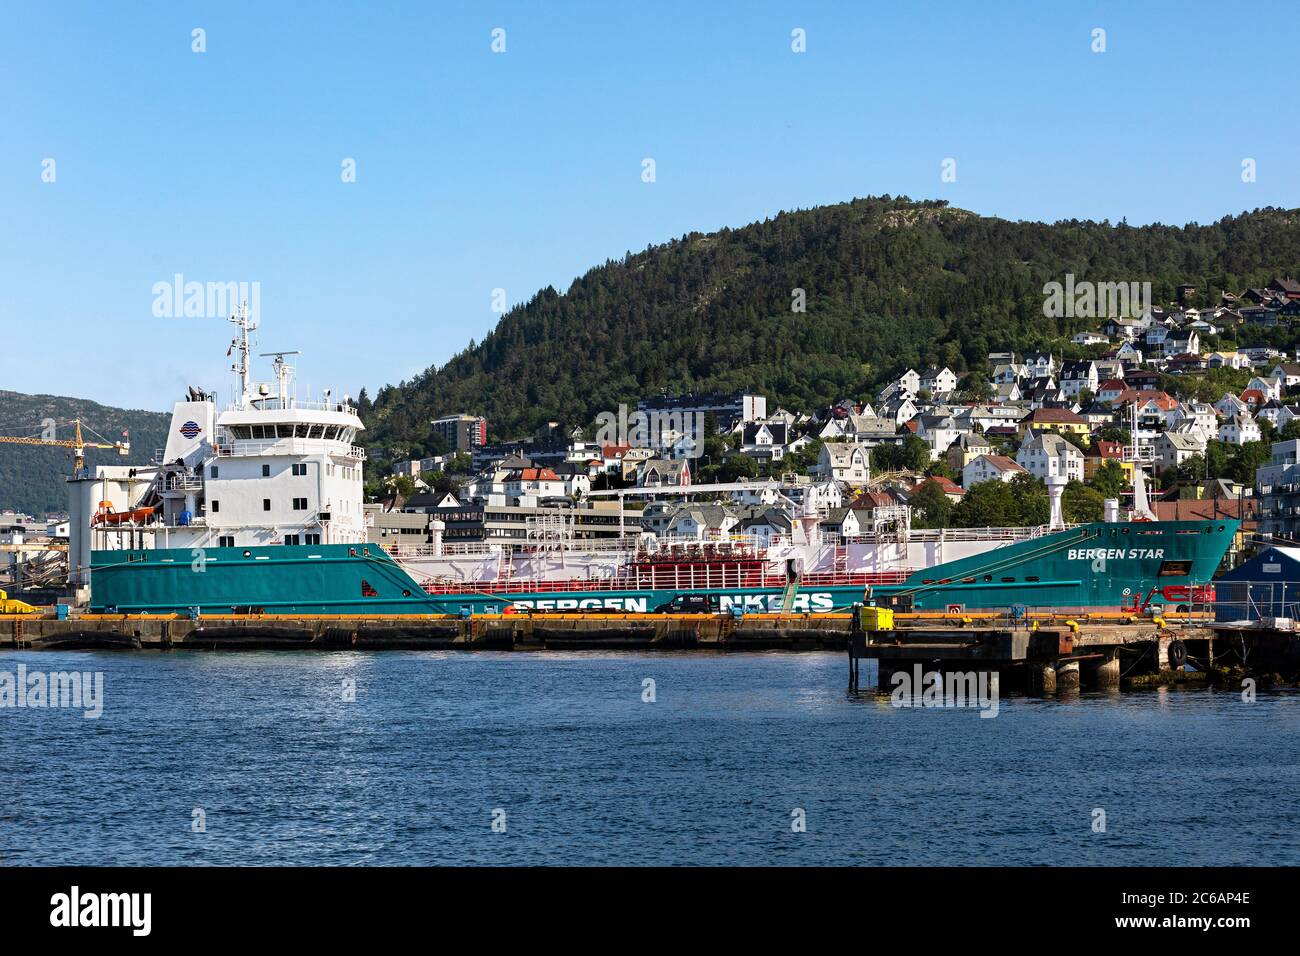 Oil products tanker Bergen Star at the old BMV Laksevaag shipyard along Puddefjorden and Byfjorden in the port of Bergen, Norway. Stock Photo